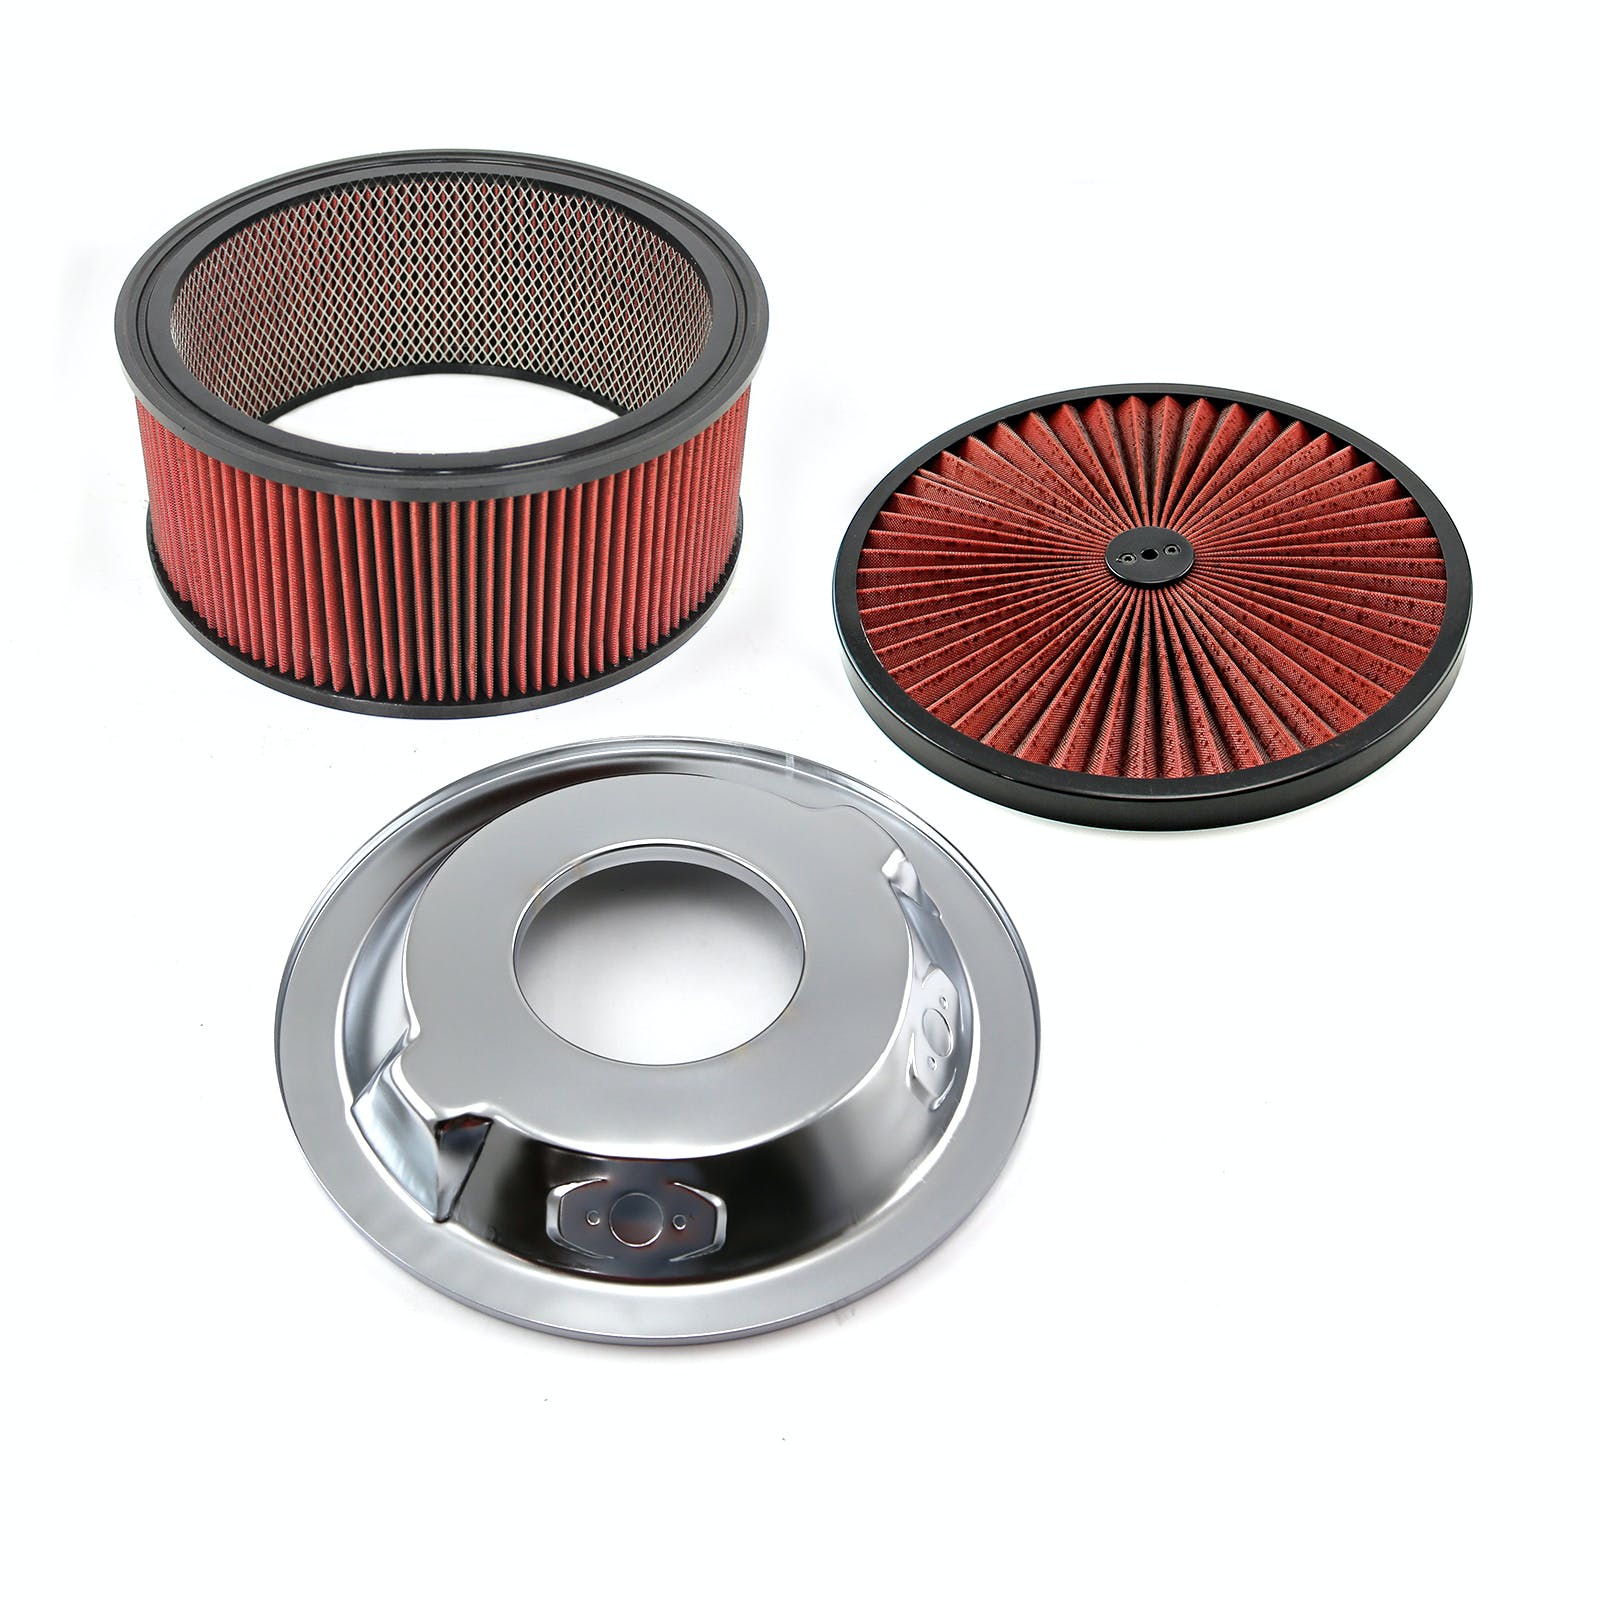 Speedmaster PCE104.1029 14 x 6 Washable Element Extreme Top w/Blk Ring Dropped Base Air Cleaner Kit